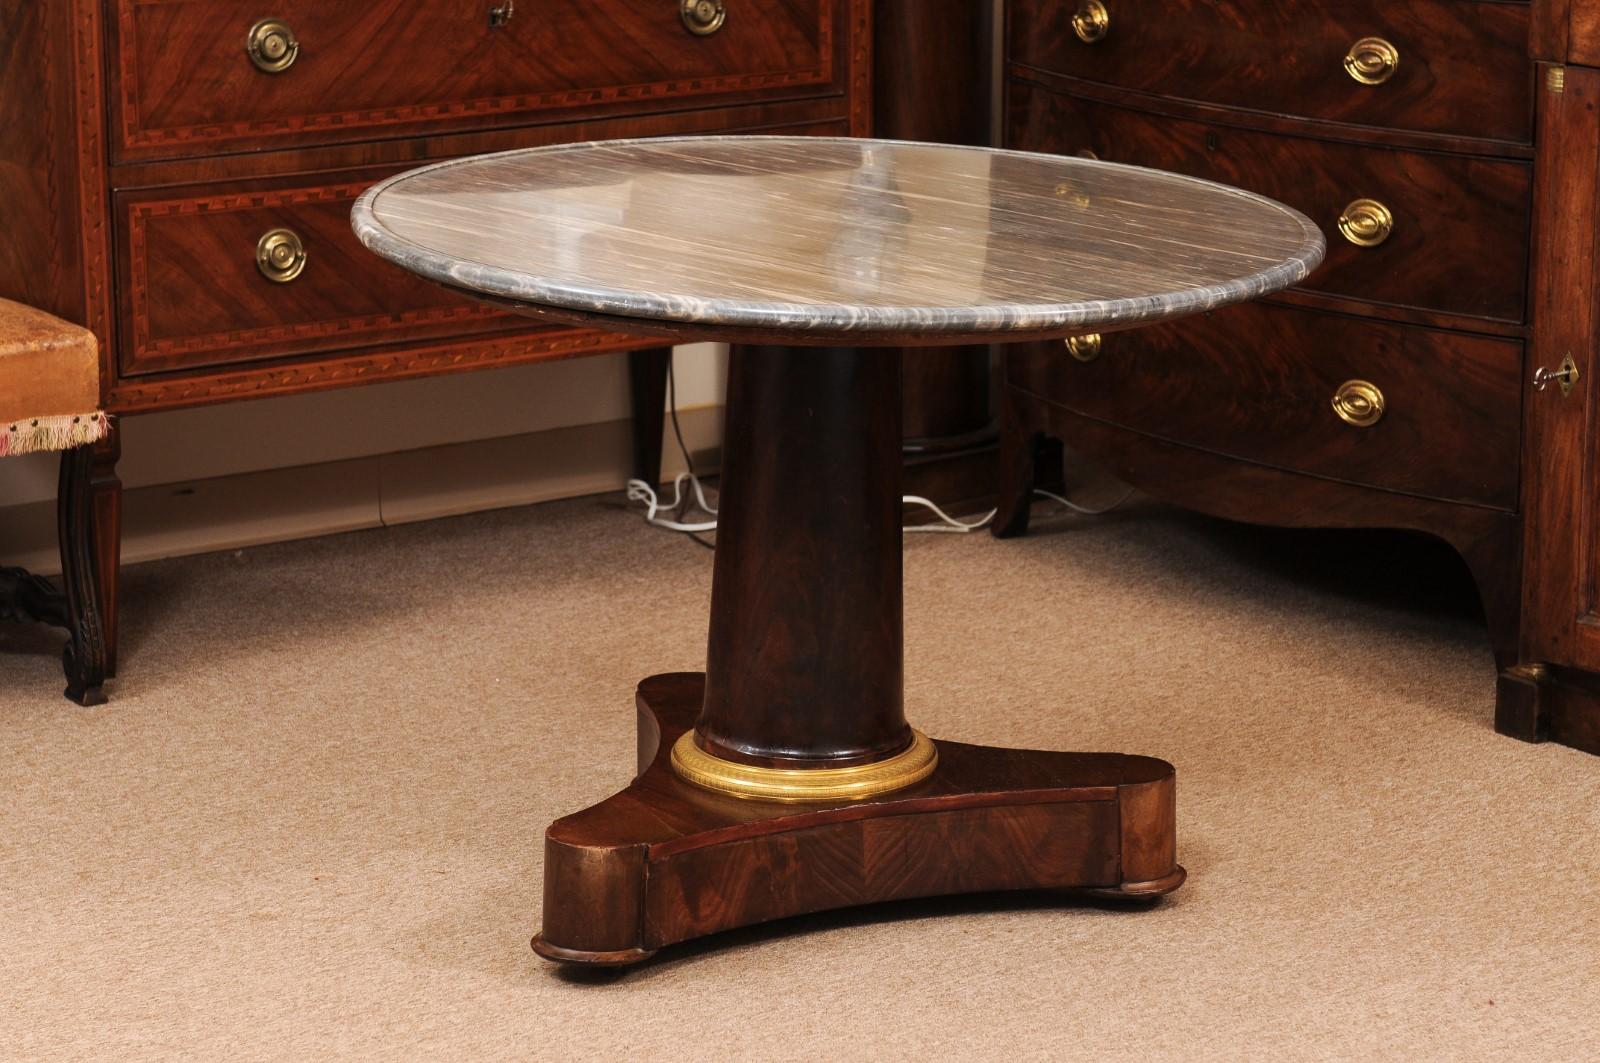  Early 19th C French Empire Walnut Center Table, Grey Marble Top & Ormolu Detail For Sale 10